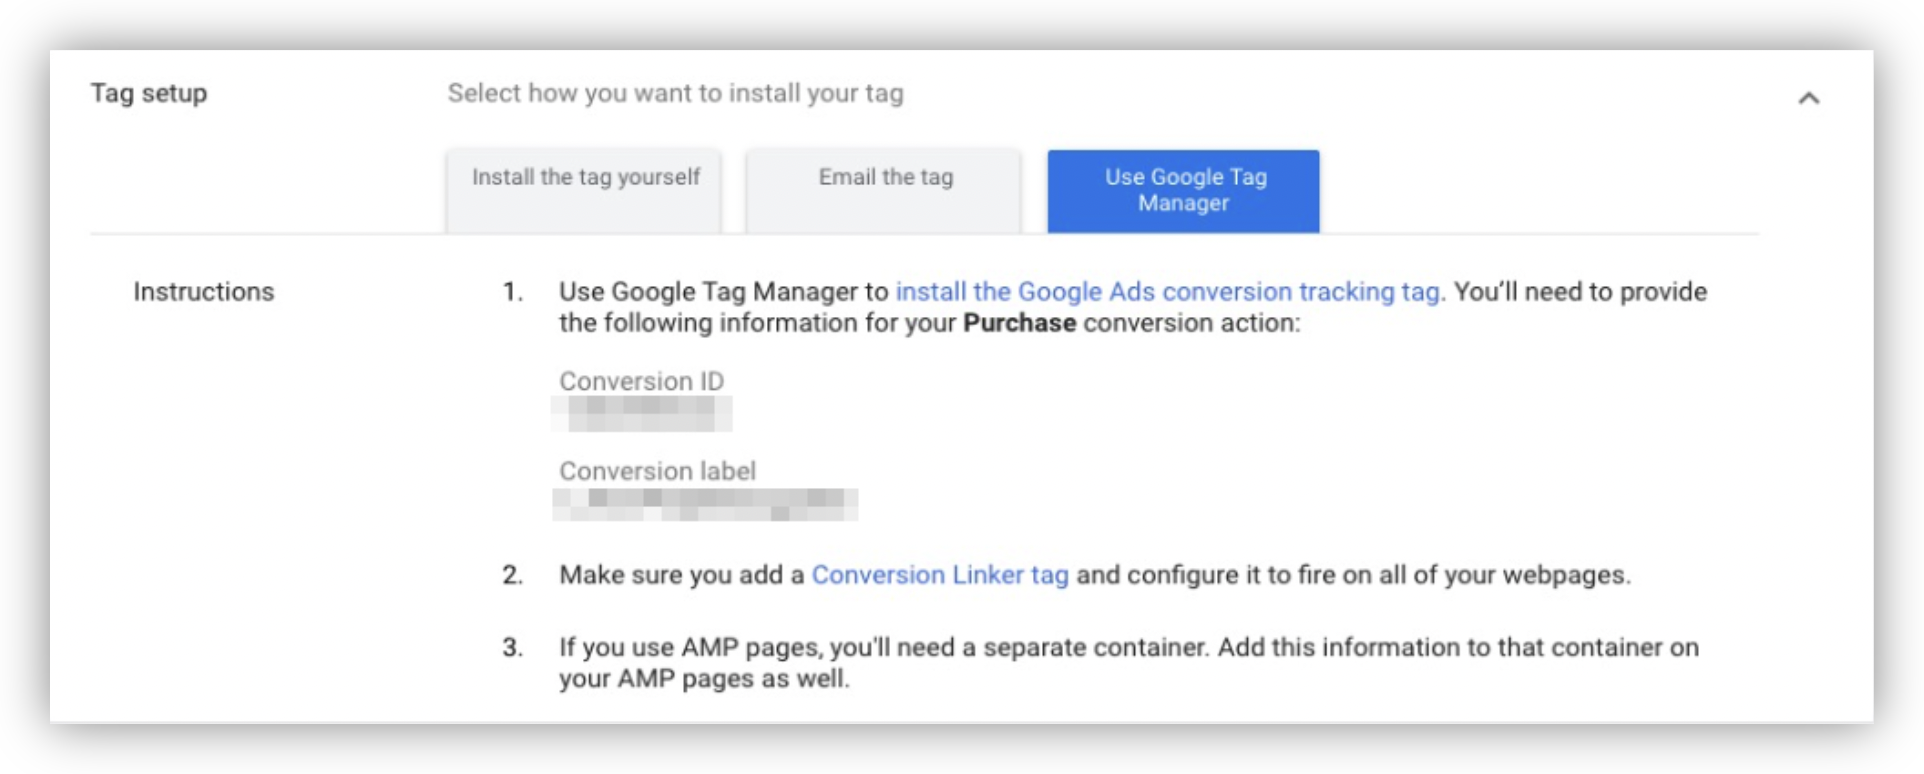 Retrieve your Conversion ID and Conversion label